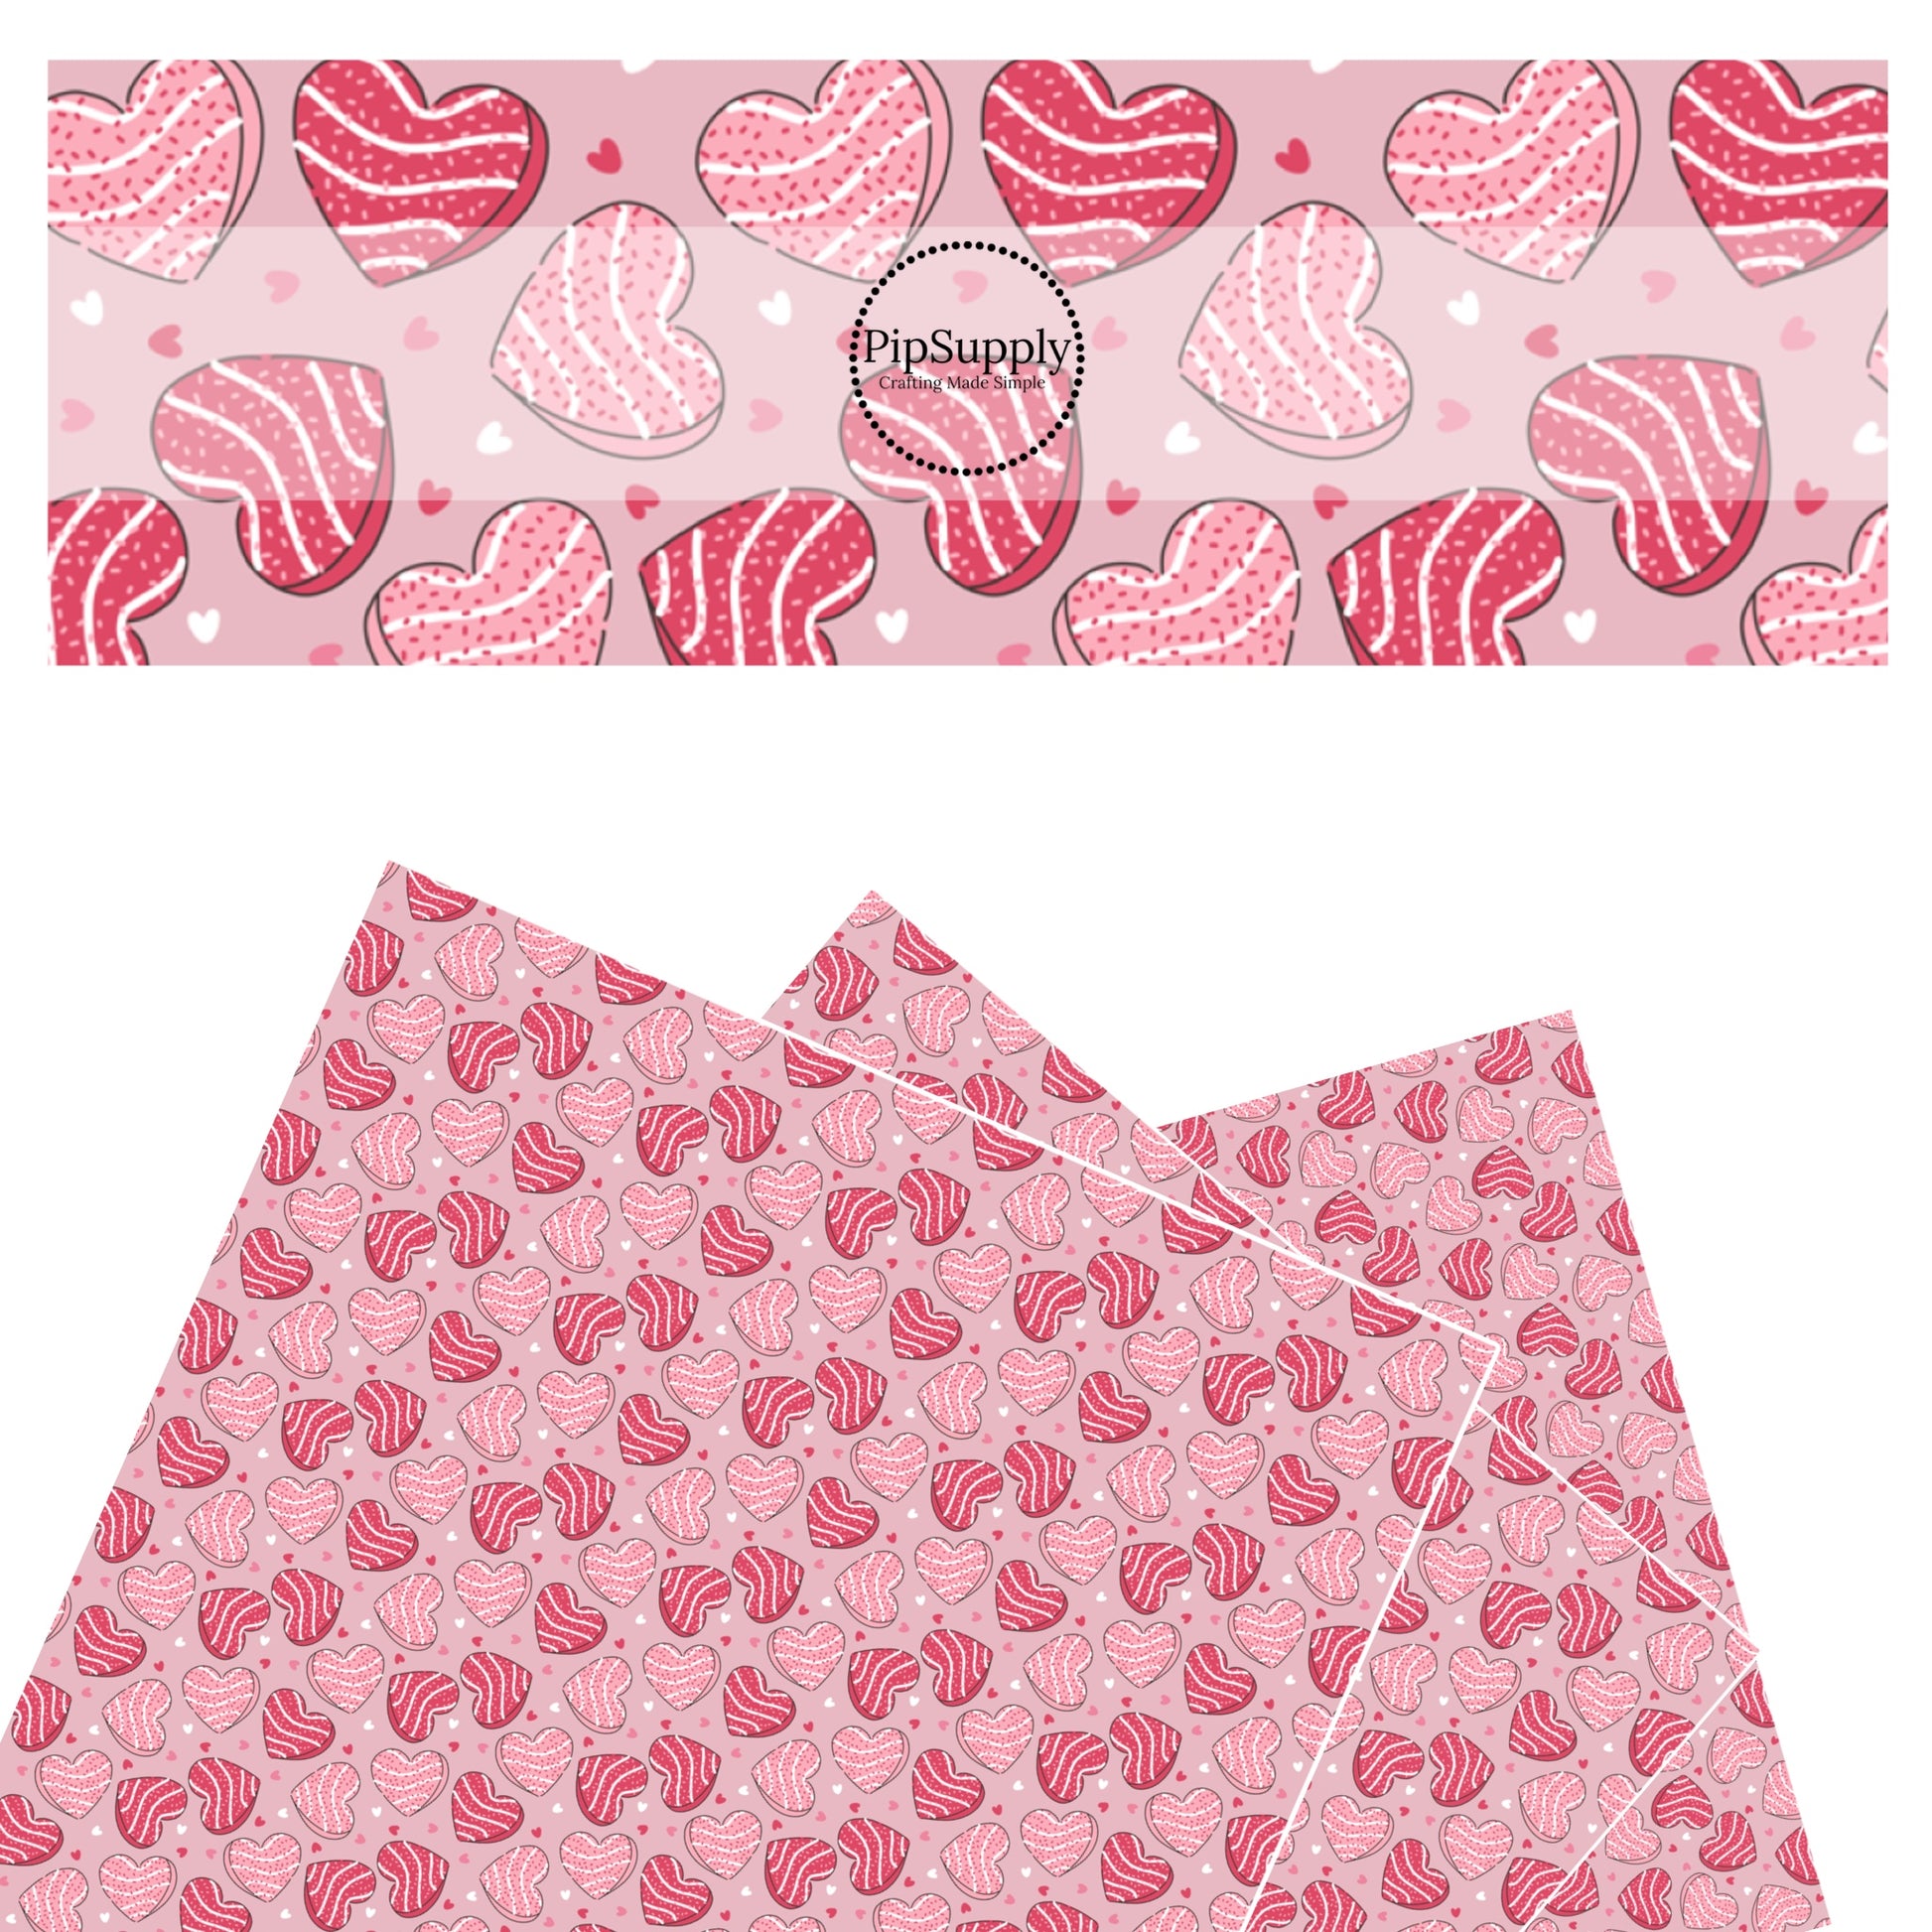 These Valentine's pattern themed faux leather sheets contain the following design elements: pink heart shaped cakes surrounded by tiny hearts on light pink. Our CPSIA compliant faux leather sheets or rolls can be used for all types of crafting projects.